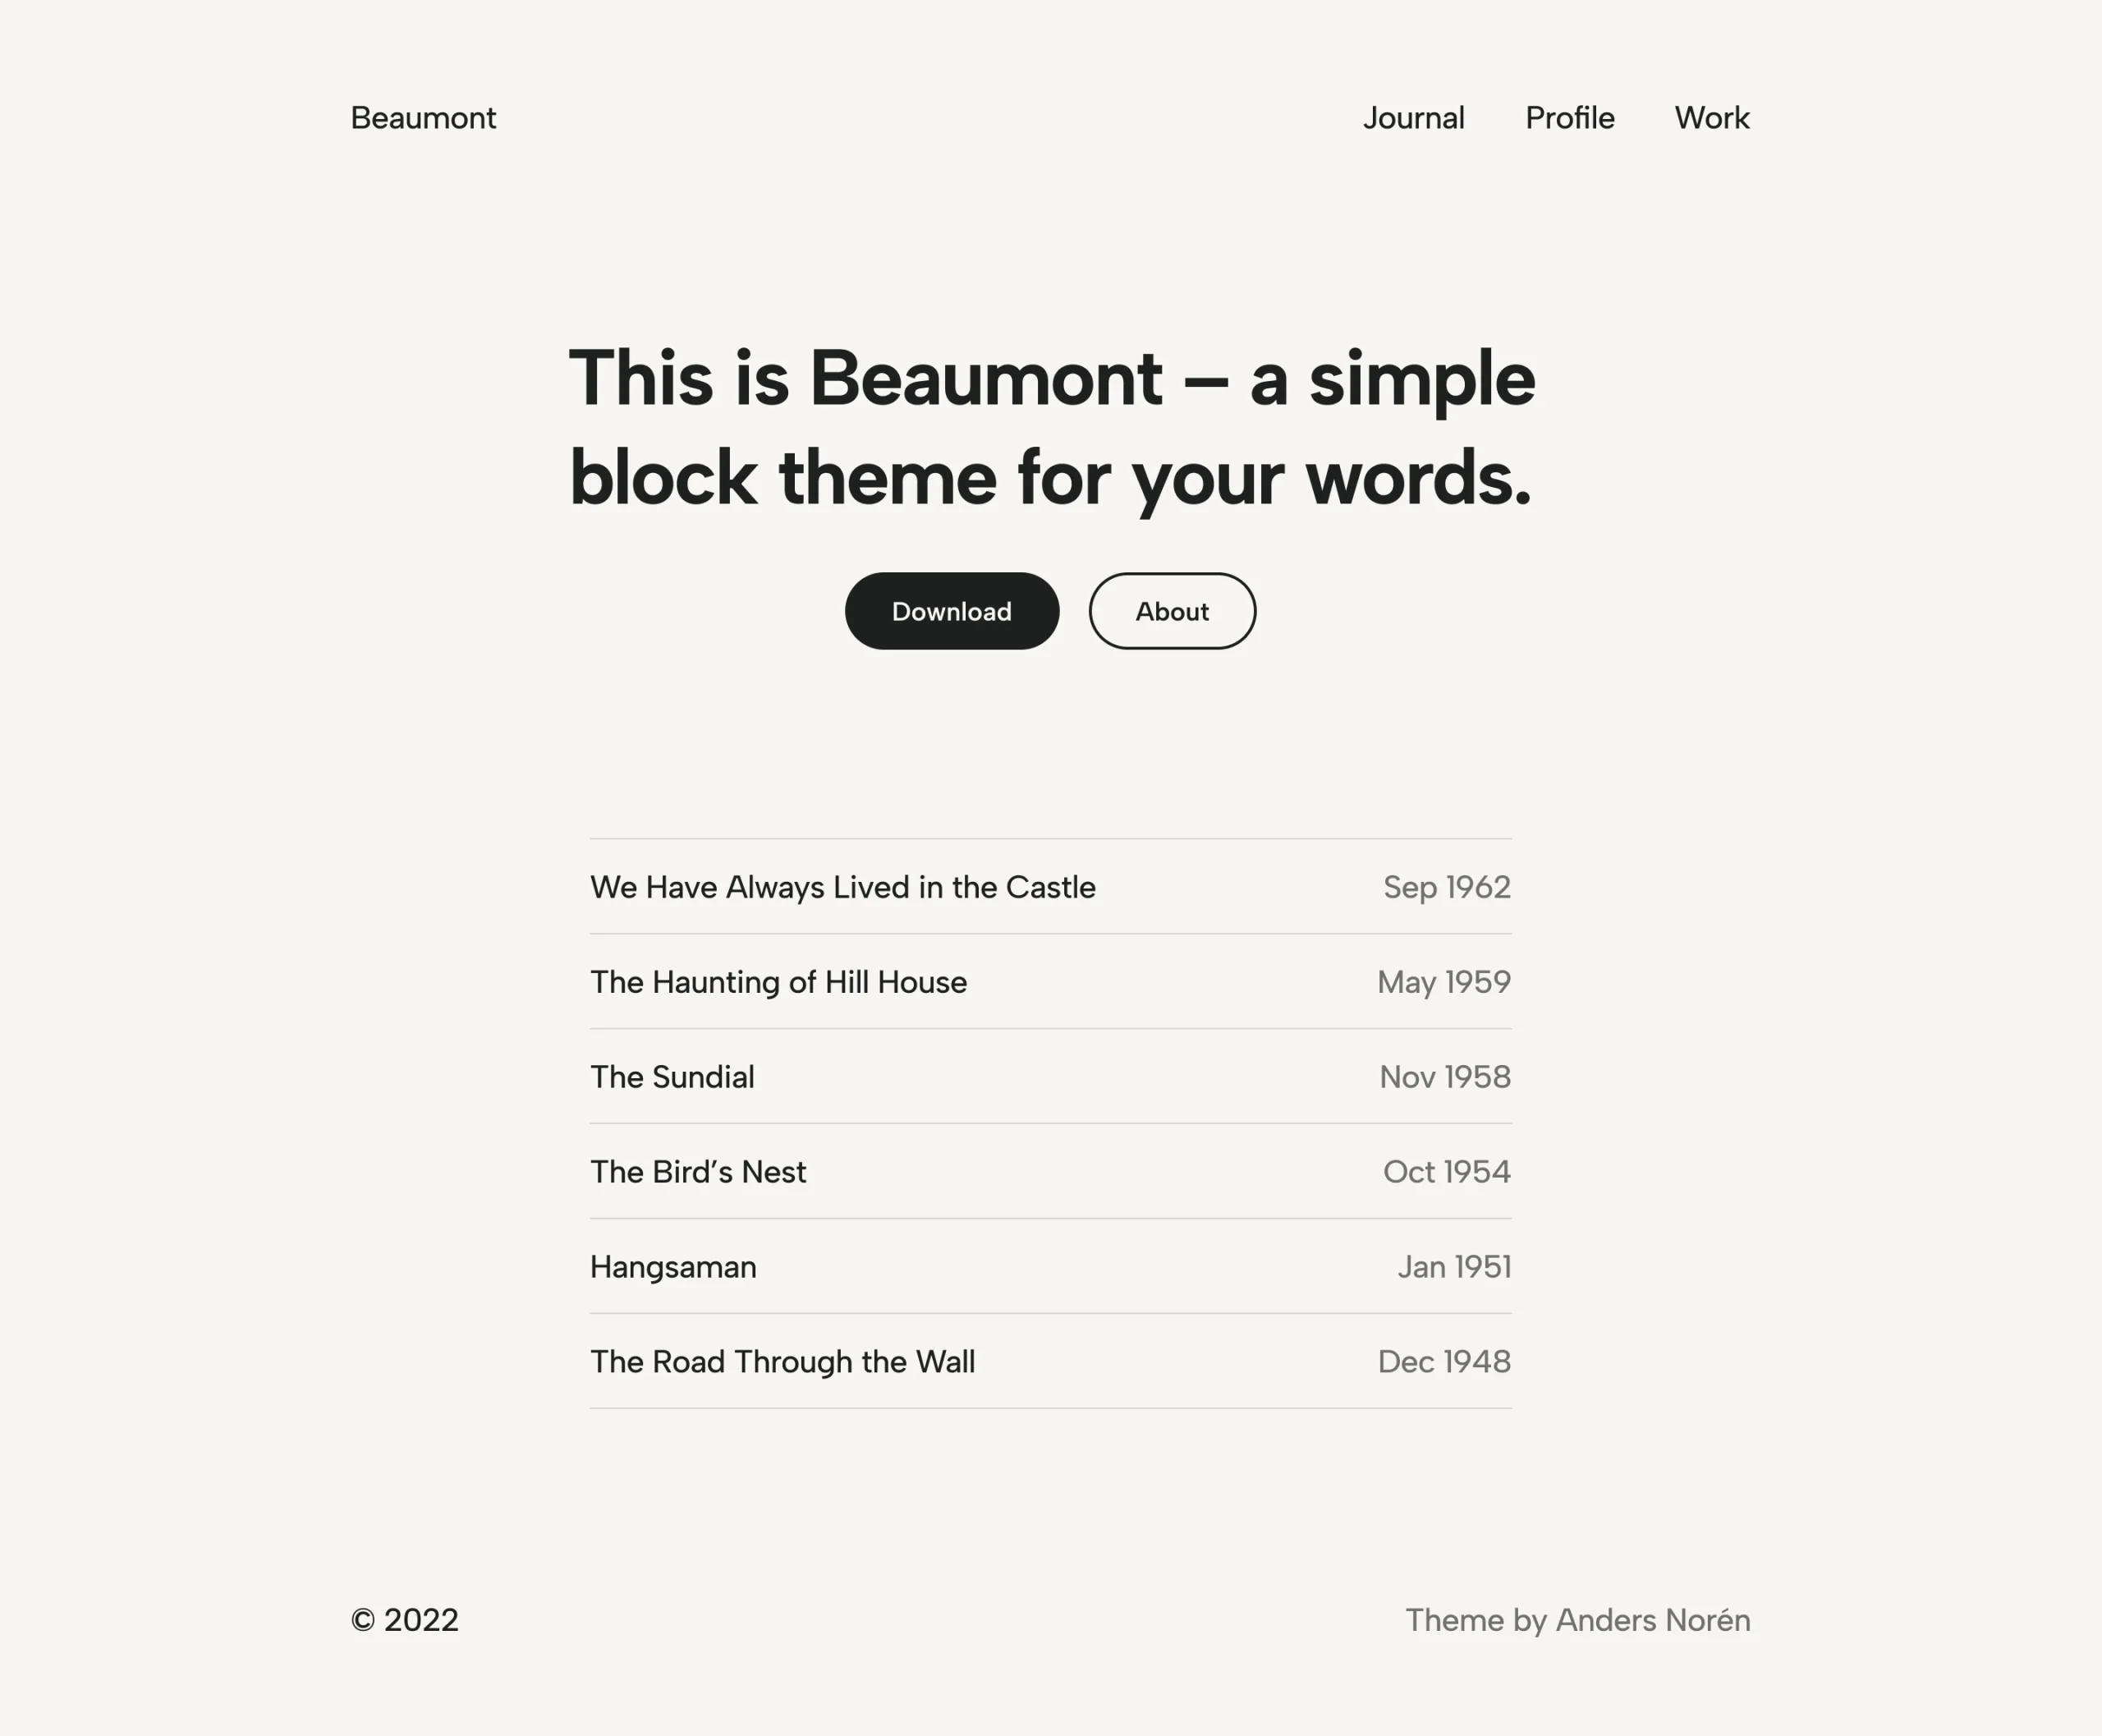 Beaumont: A New WordPress Block Theme with a Focus on Longform Writing